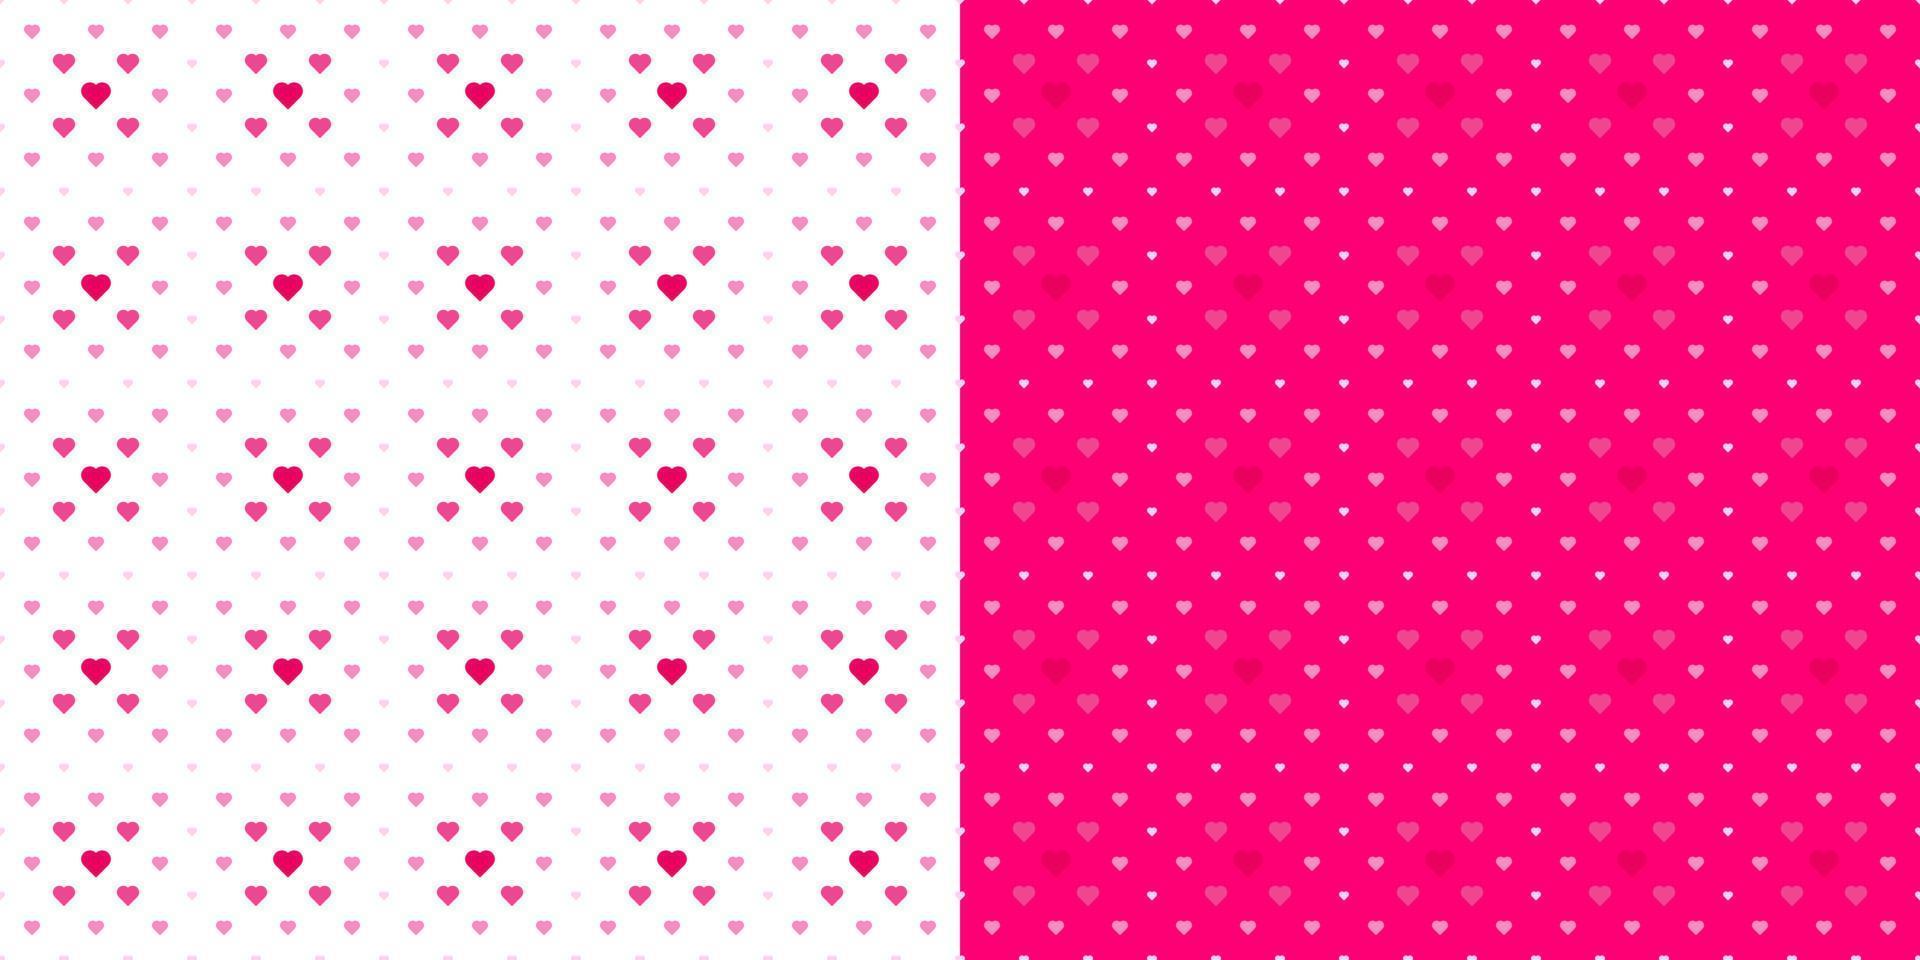 Seamless pink heart shape white background pattern set. Design elements for banner, fabric, tile, template, card, poster, backdrop, wall. Vector illustration.